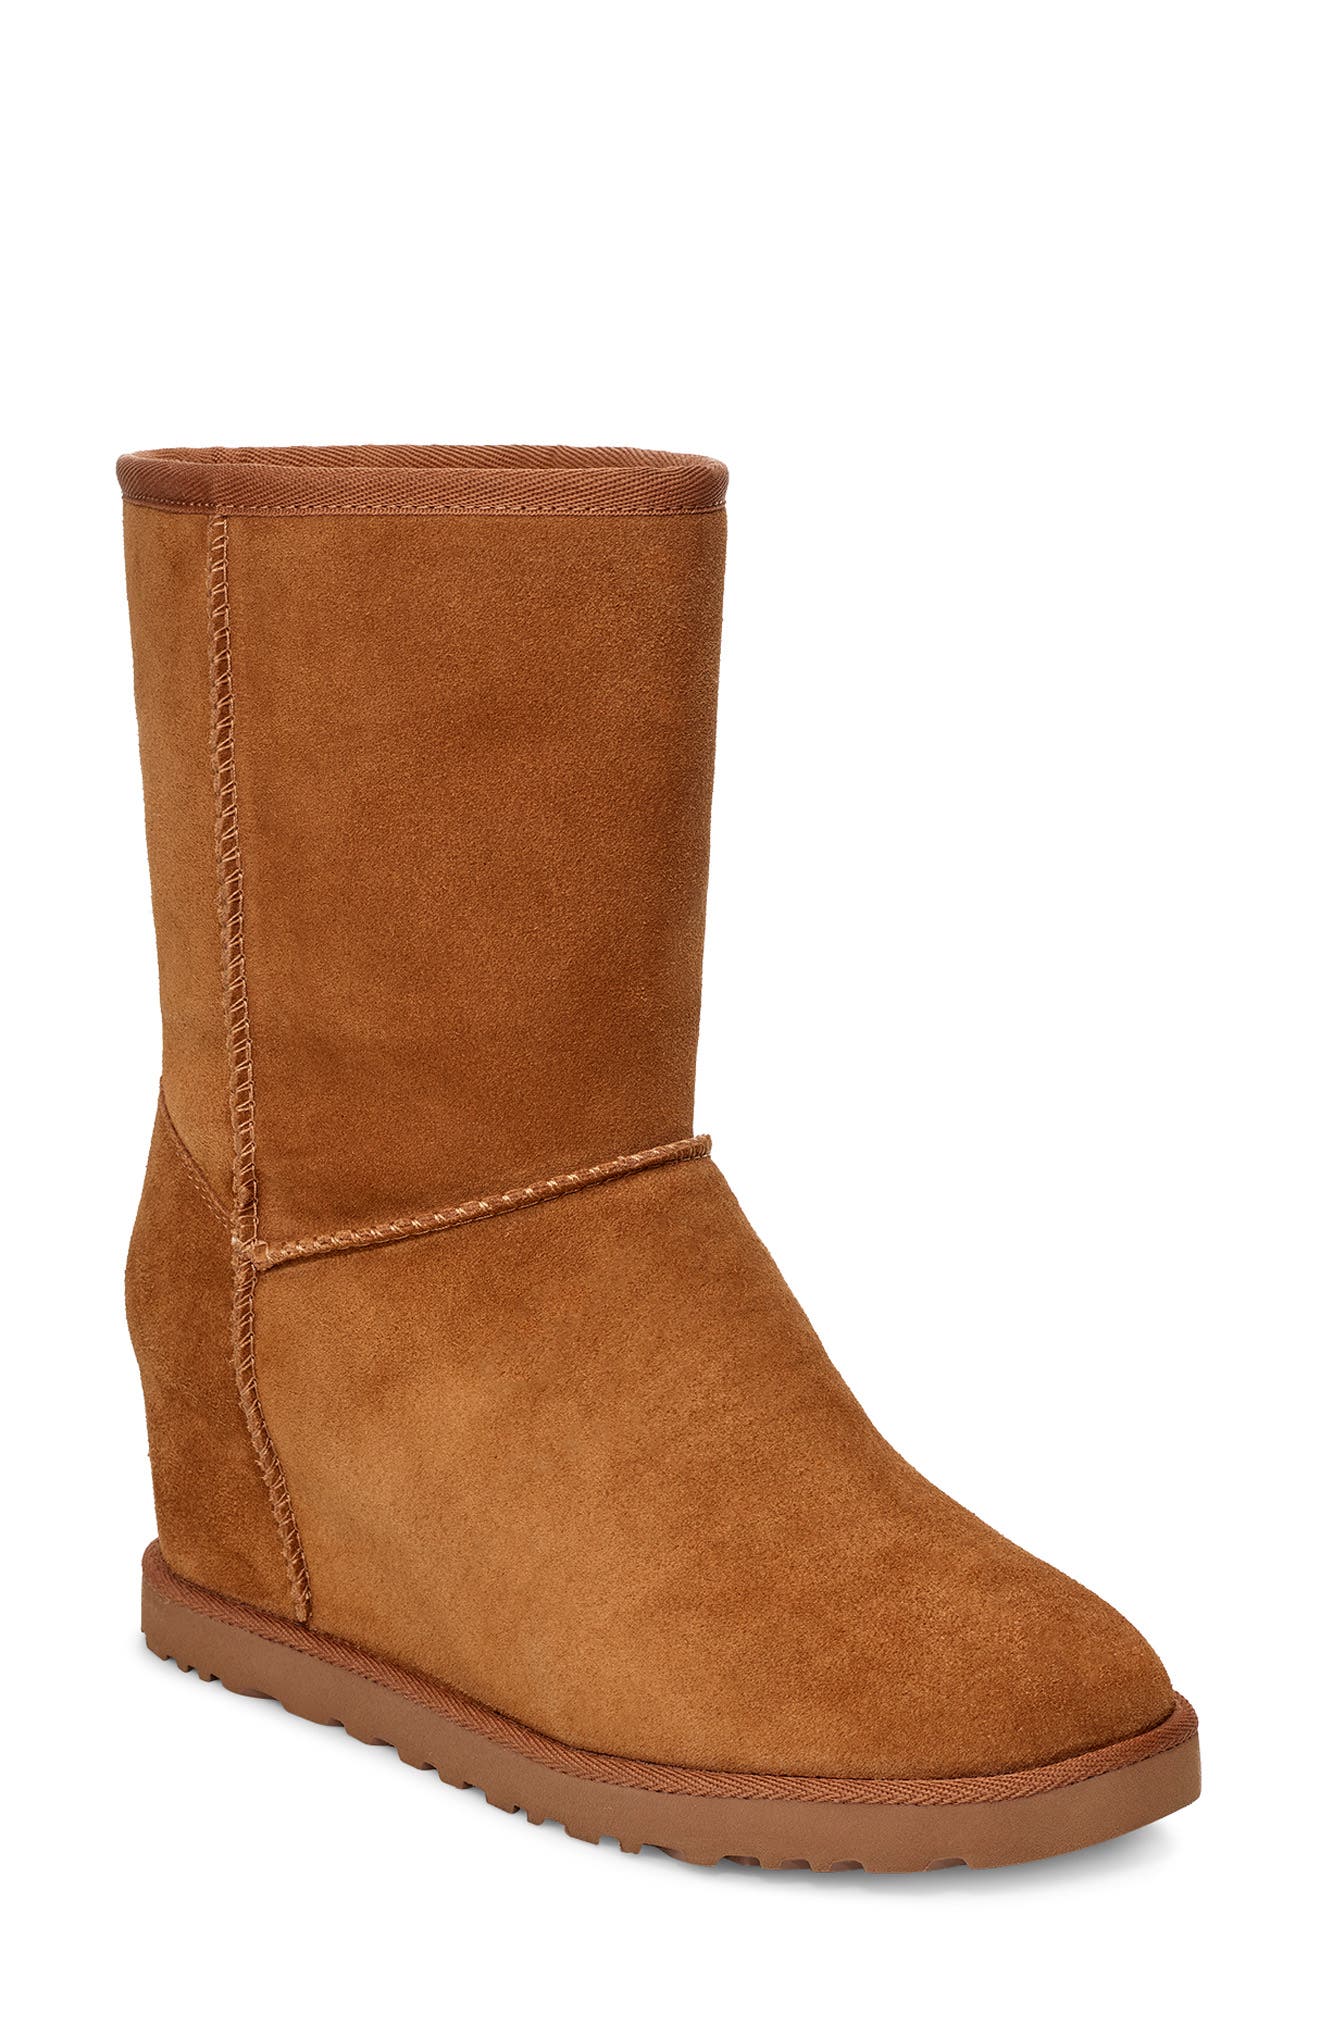 lord and taylor ugg boots